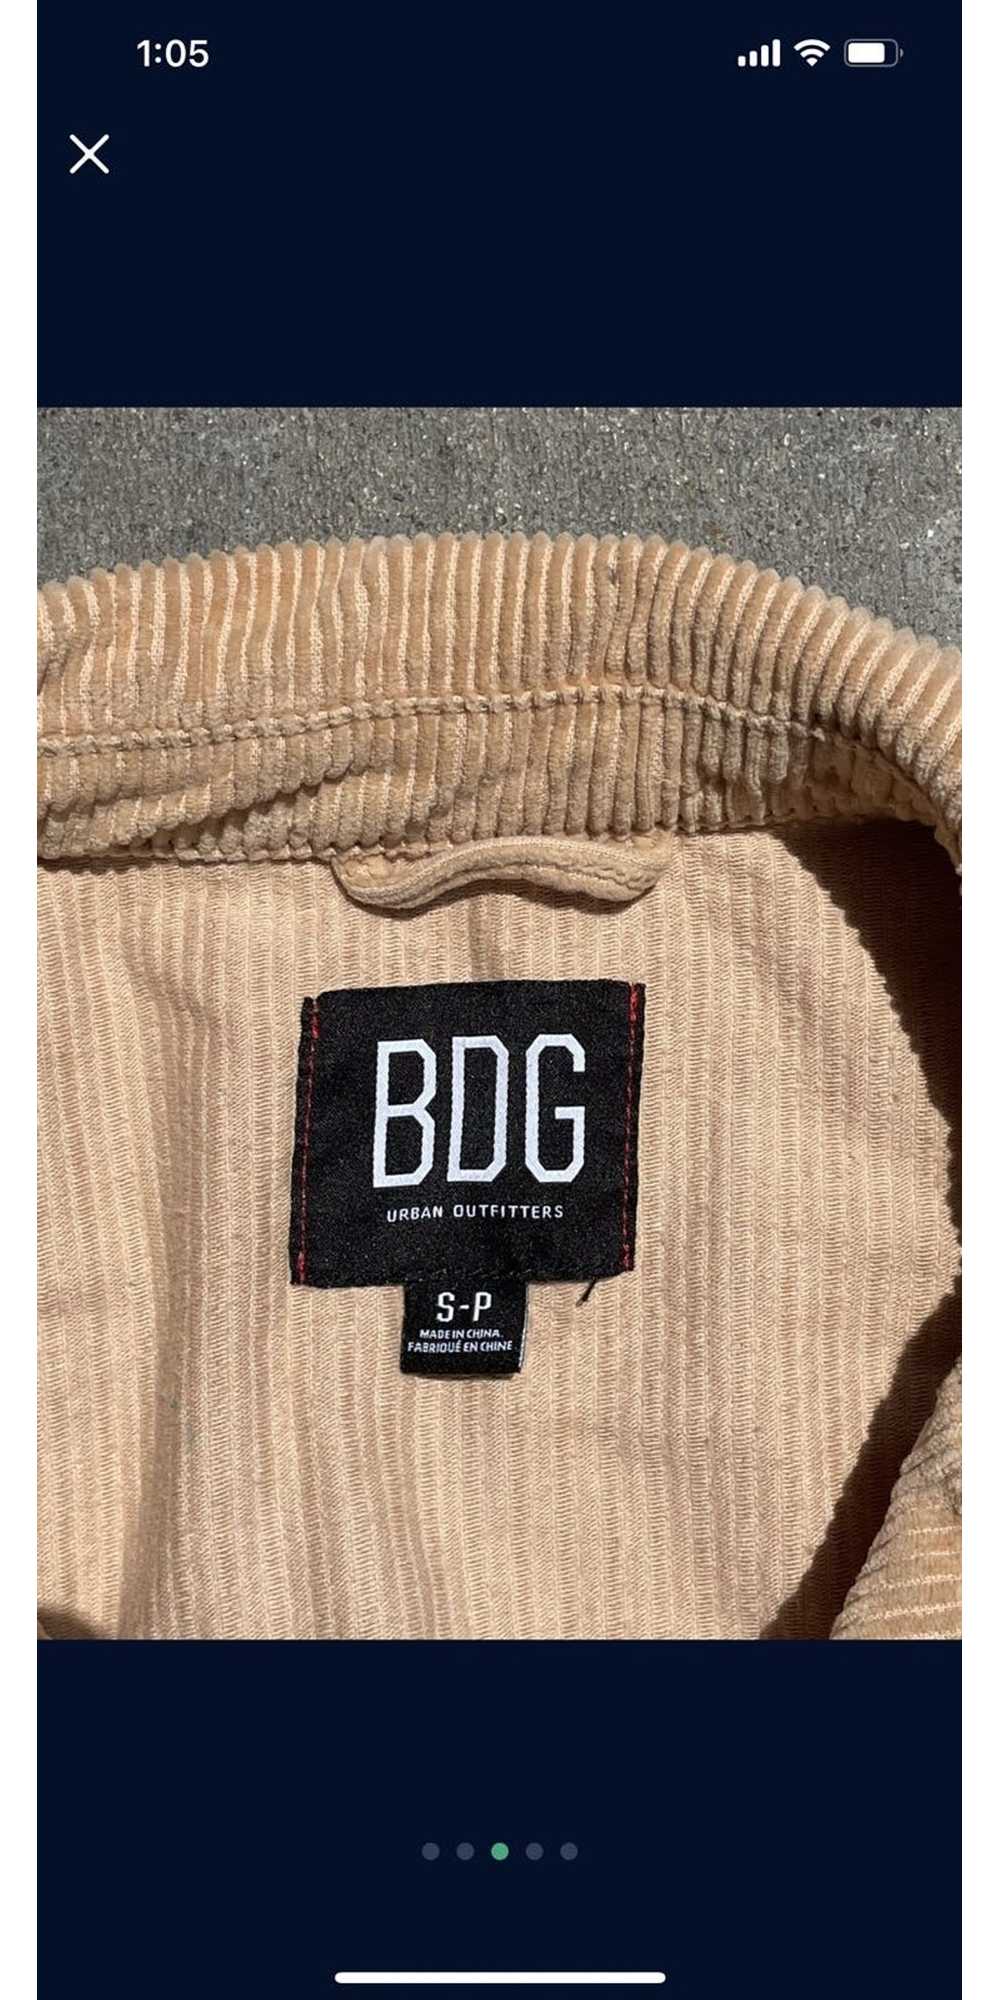 Bdg Corduroy BDG Urban Outfitters Jacket - image 3